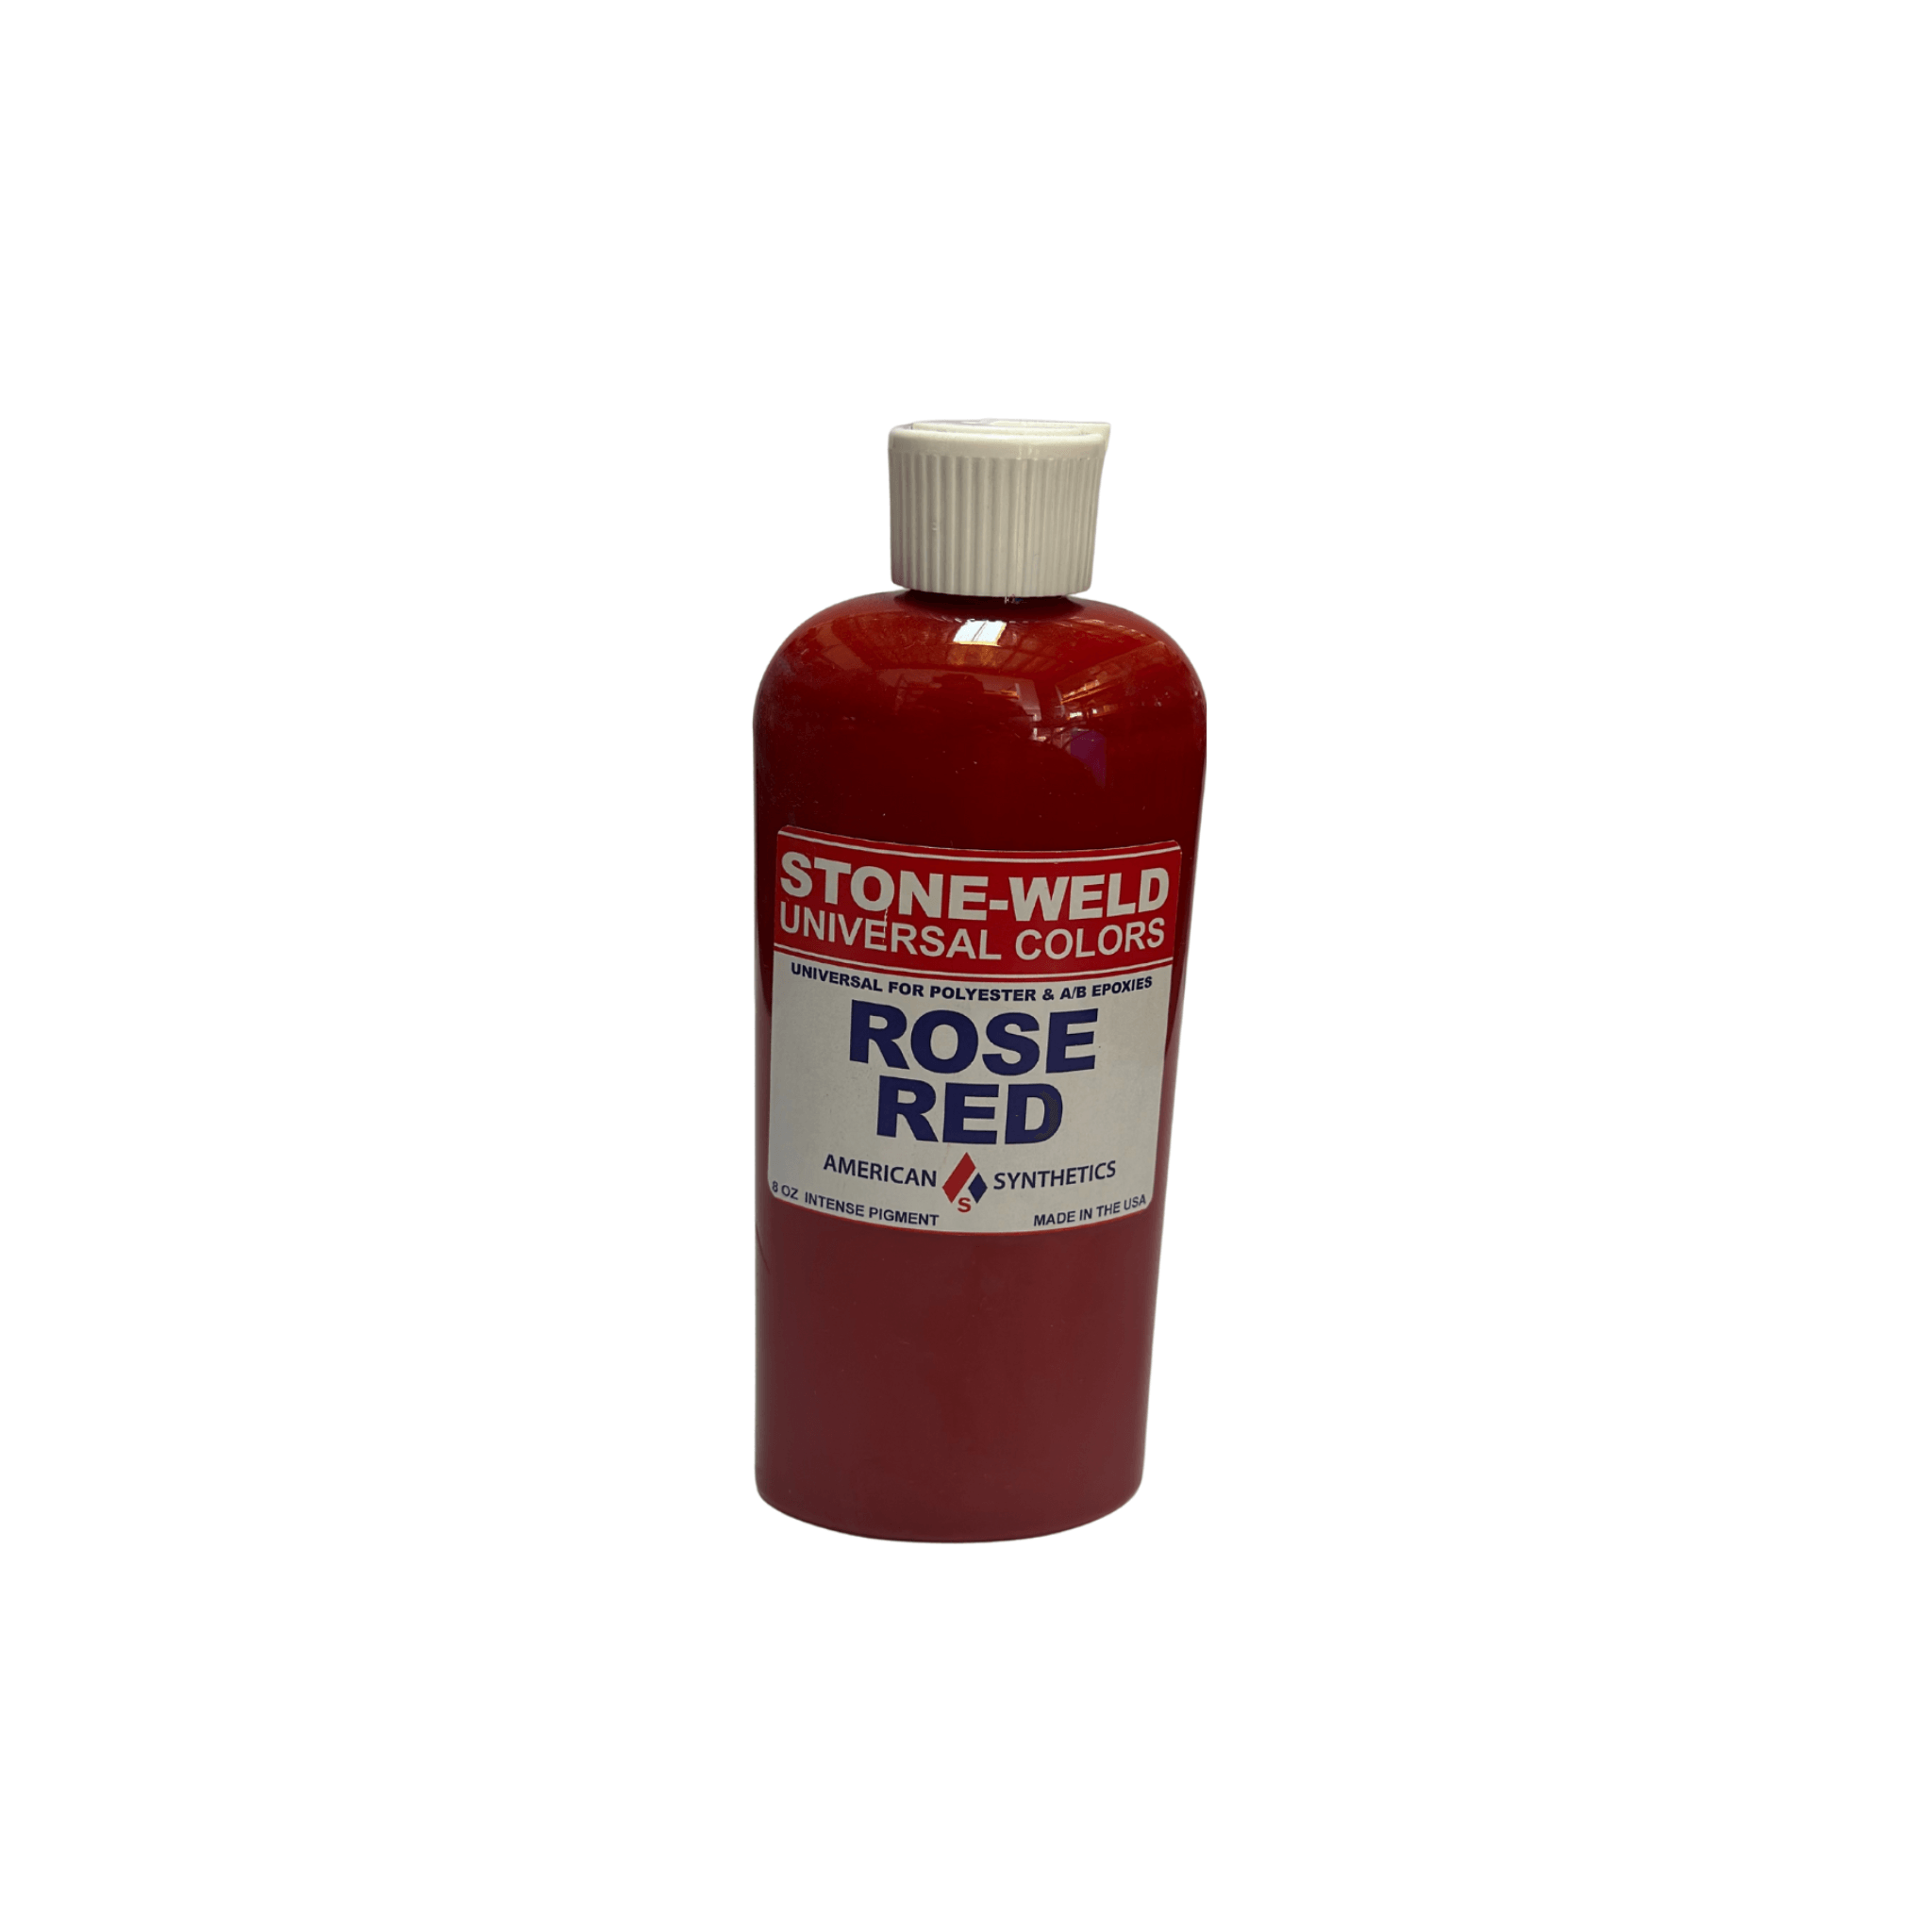 Stone-Weld 8 oz. Universal Color, Rose Red - Direct Stone Tool Supply, Inc